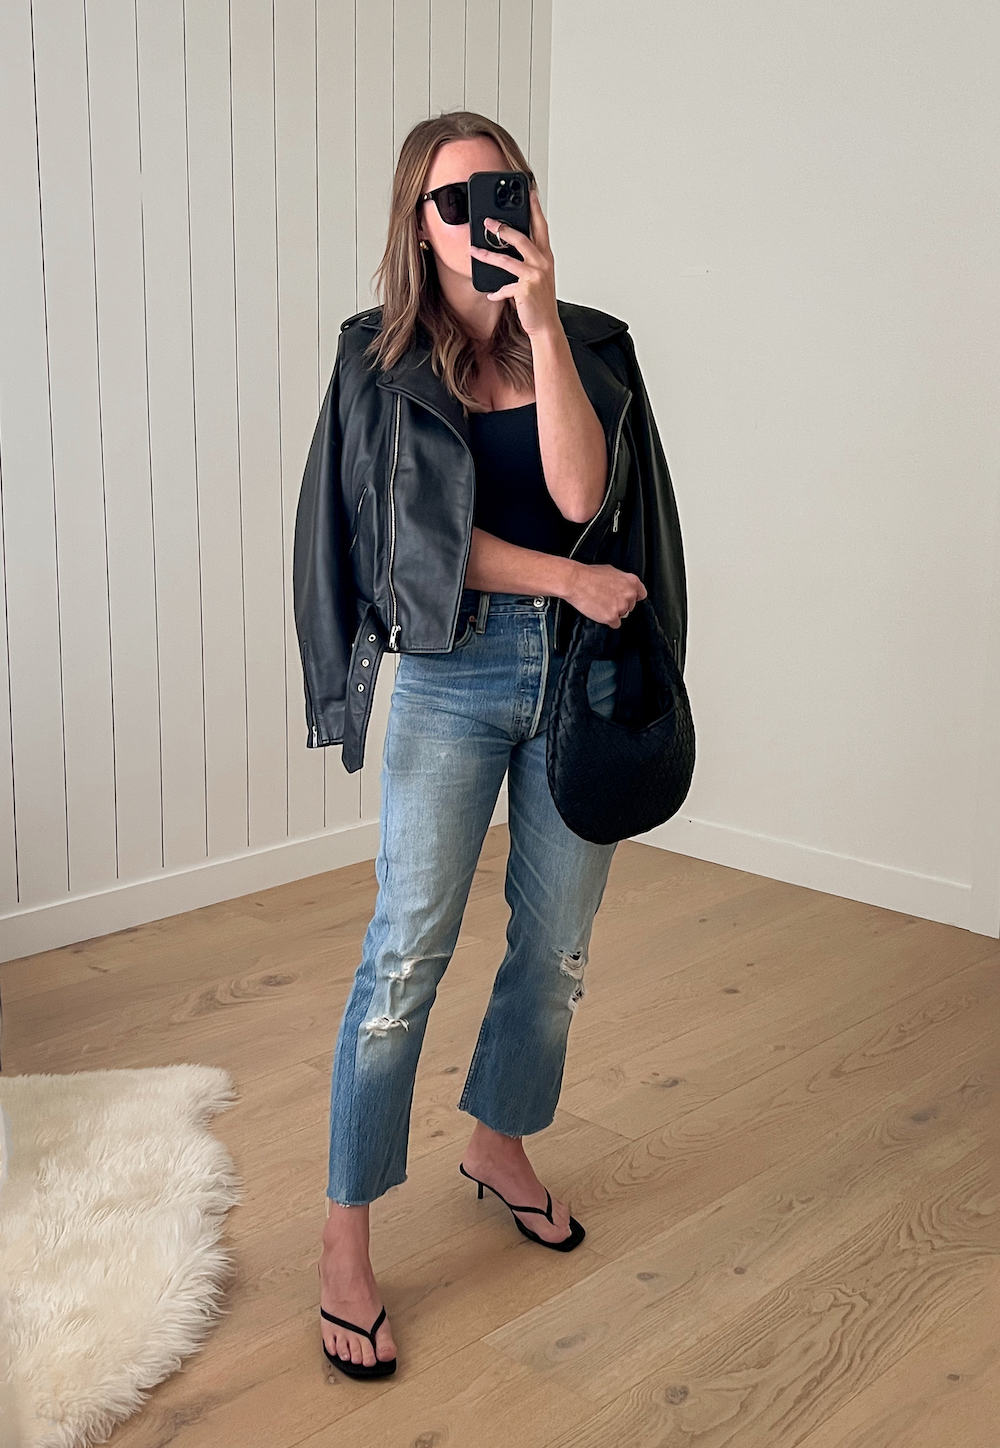 Woman wearing distressed straight leg jeans, a black tank top and a black leather jacket with black heeled sandals.